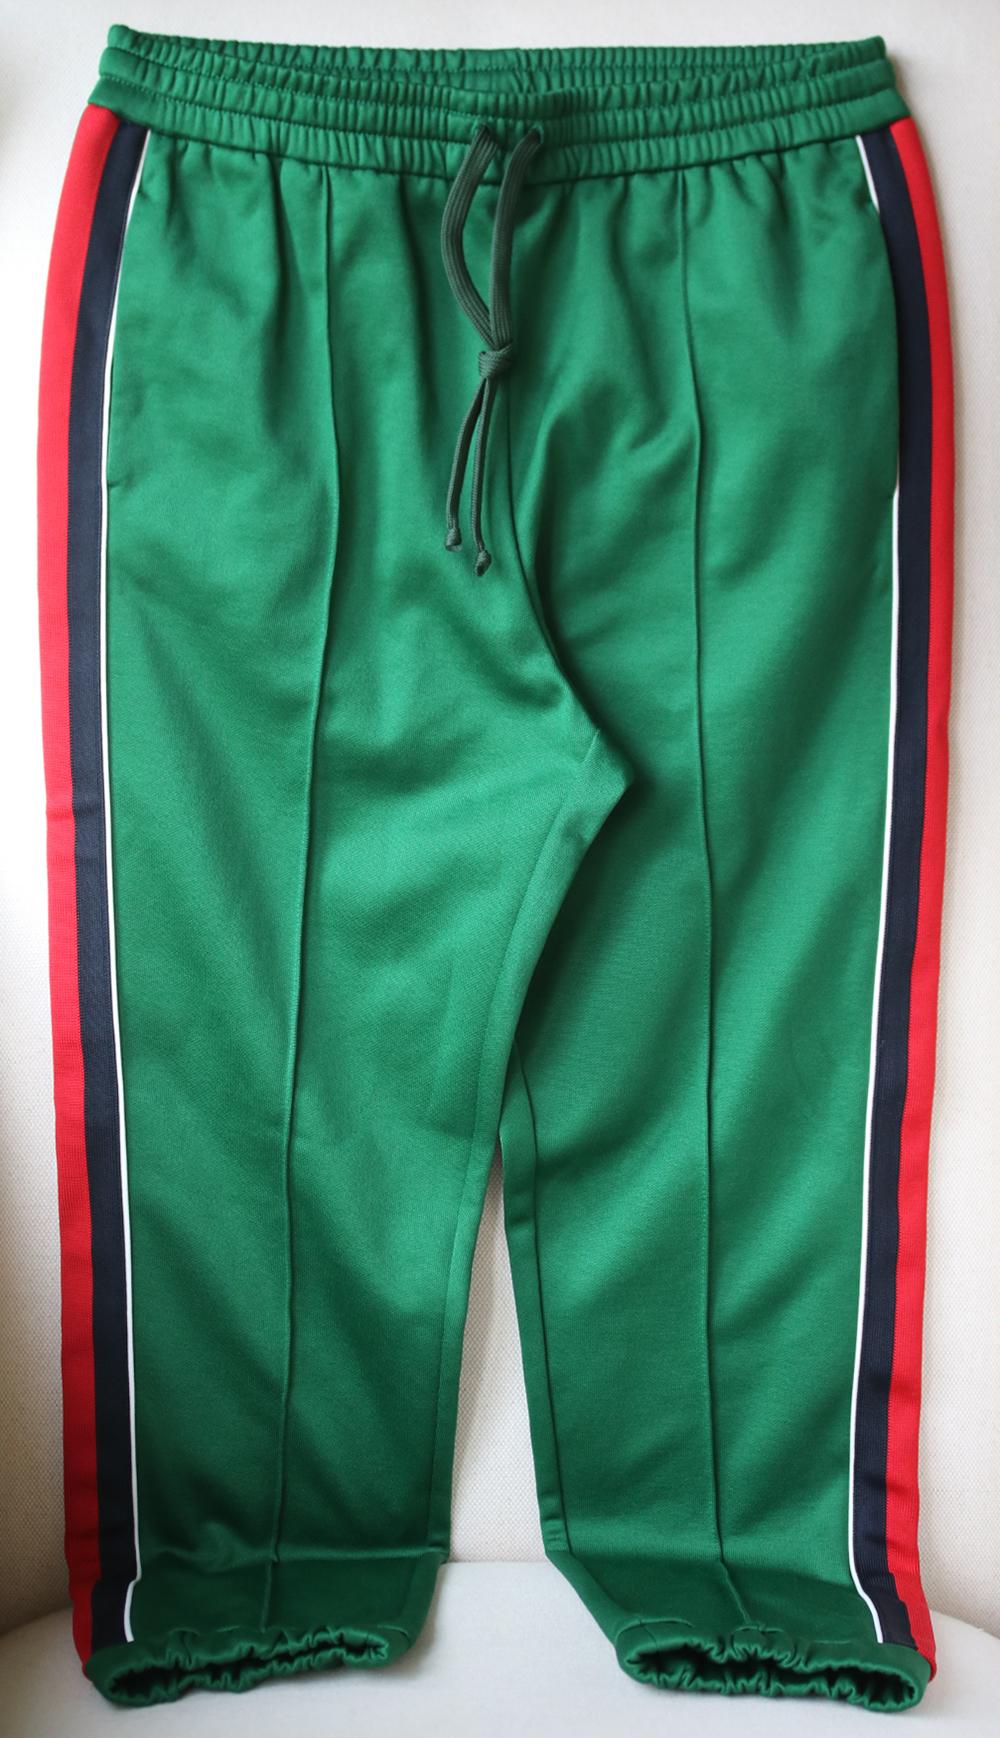 Italian-made from lustrous green tech-jersey, they have raised seams at the front and comfortable elasticated trims. Multicolored tech-jersey. Pull on. 55% polyester, 45% cotton. Designer colour: Yard. Made in Italy.

Size: Large (UK 12, US 8, FR